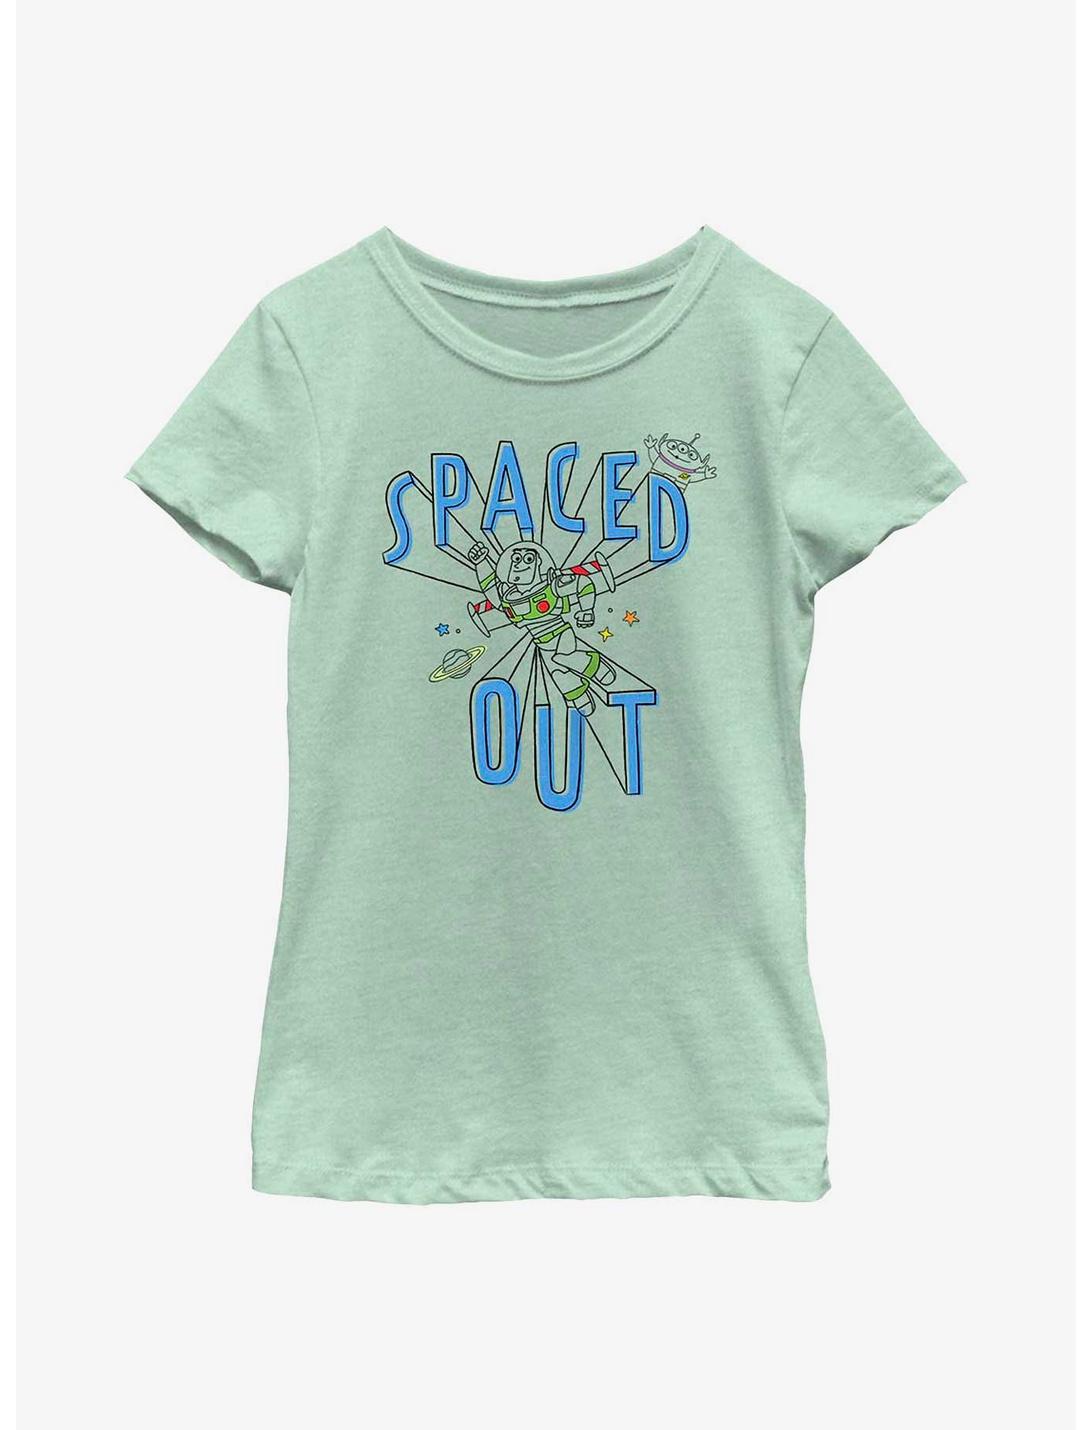 Disney Pixar Toy Story Spaced Out Youth Girls T-Shirt, MINT, hi-res